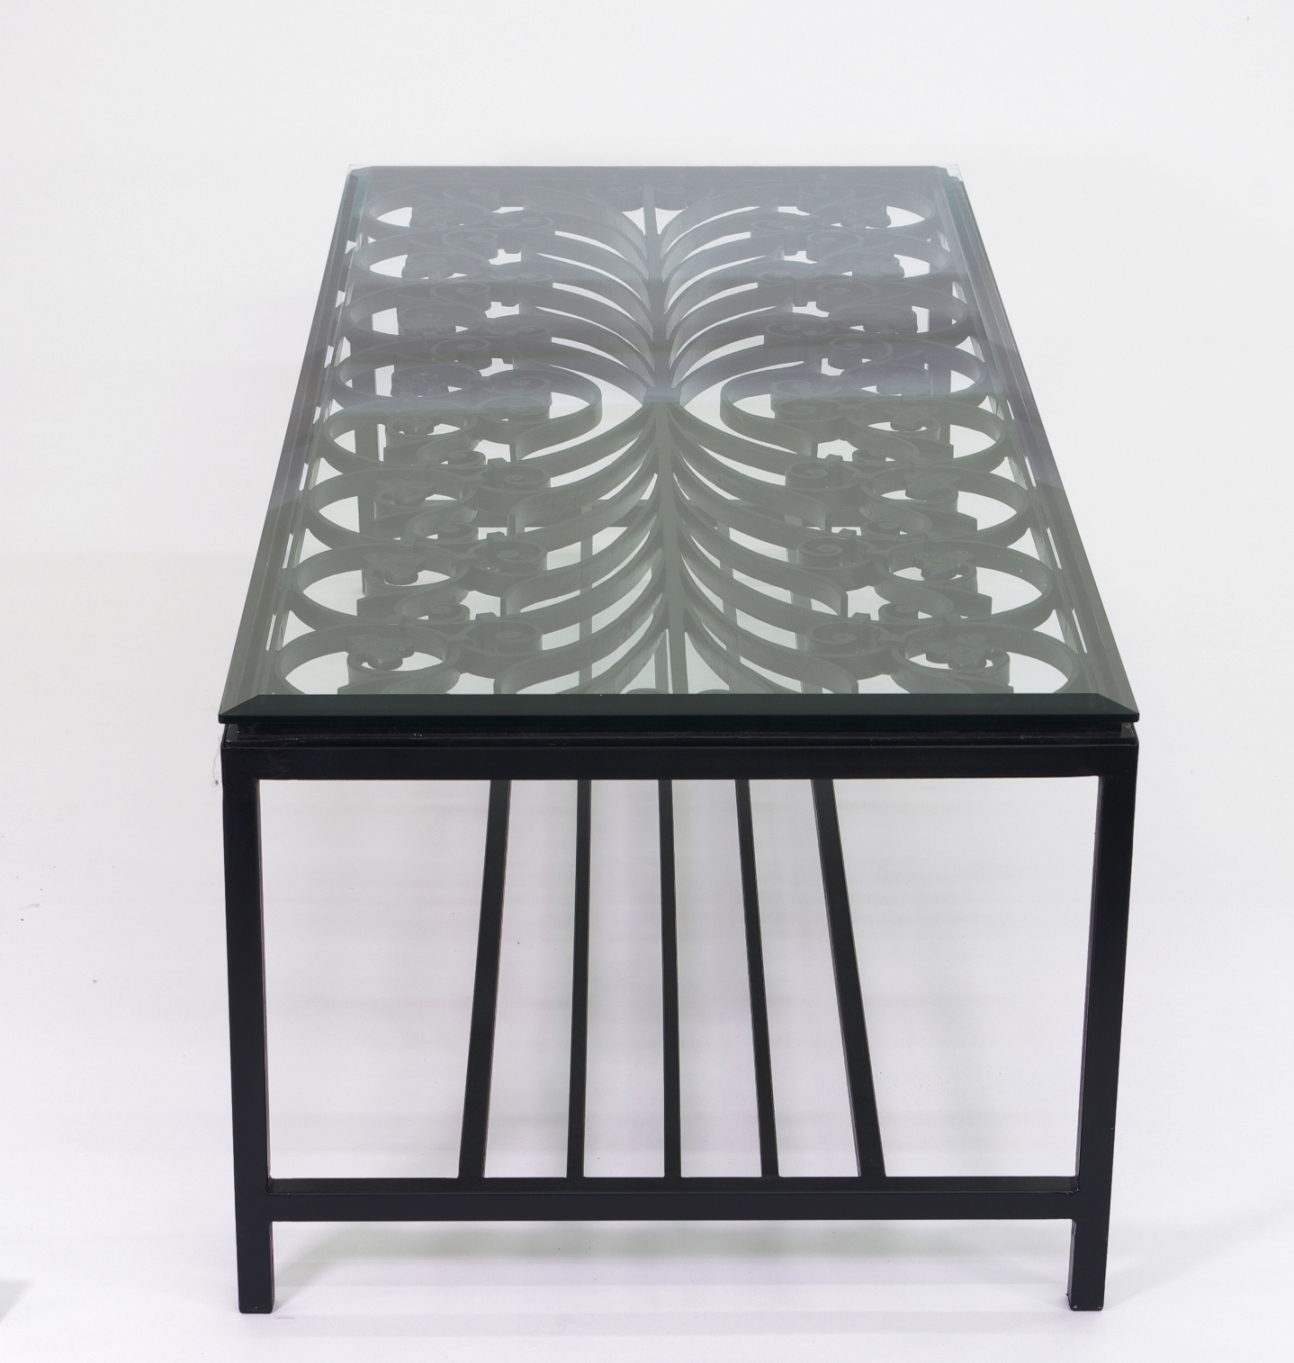 French Wrought Iron Window Guard Mounted as a Coffee Table, Mid 19th c.